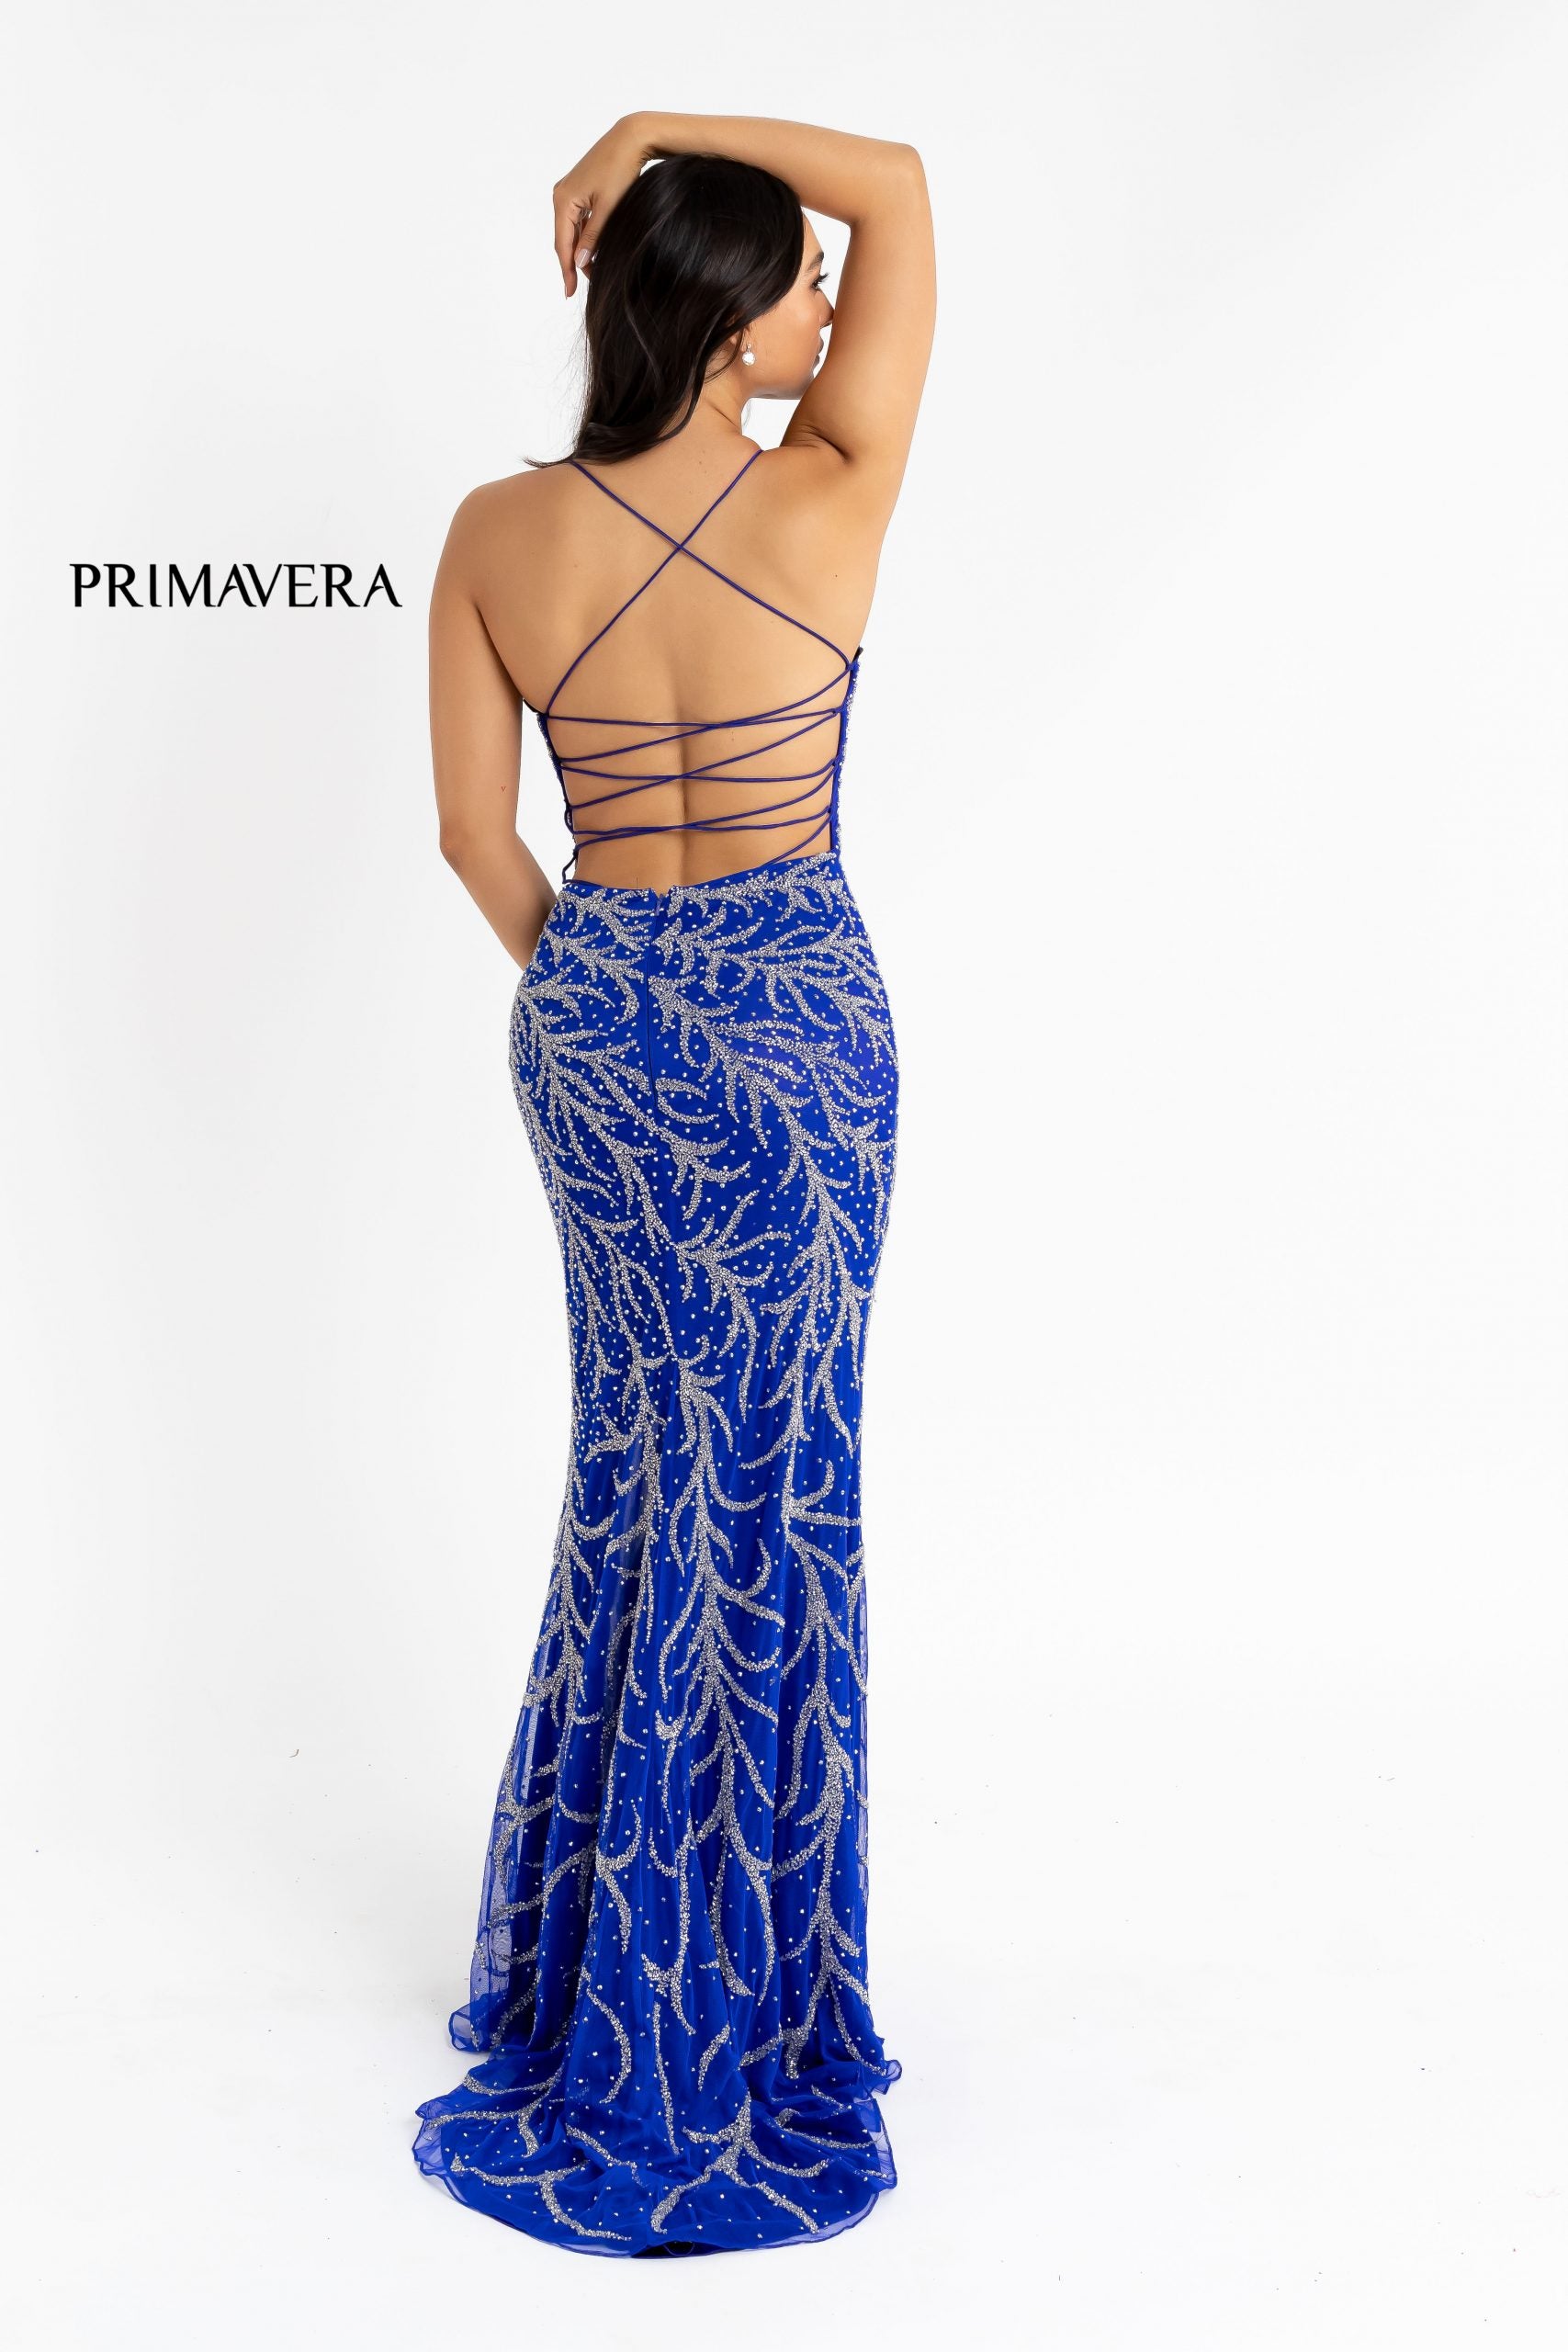 Primavera couture 3636 is a long fitted formal evening gown. This Prom Dress Features a deep V Plunging neckline with mesh insert and spaghetti straps leading around to an open back with a corset lace up tie closure. This Backless Pageant gown Features Beaded Embellishments cascading down the length of the dress. The skirt has a slit & Sweeping train.  Available Sizes: 4  Available Colors: Blue